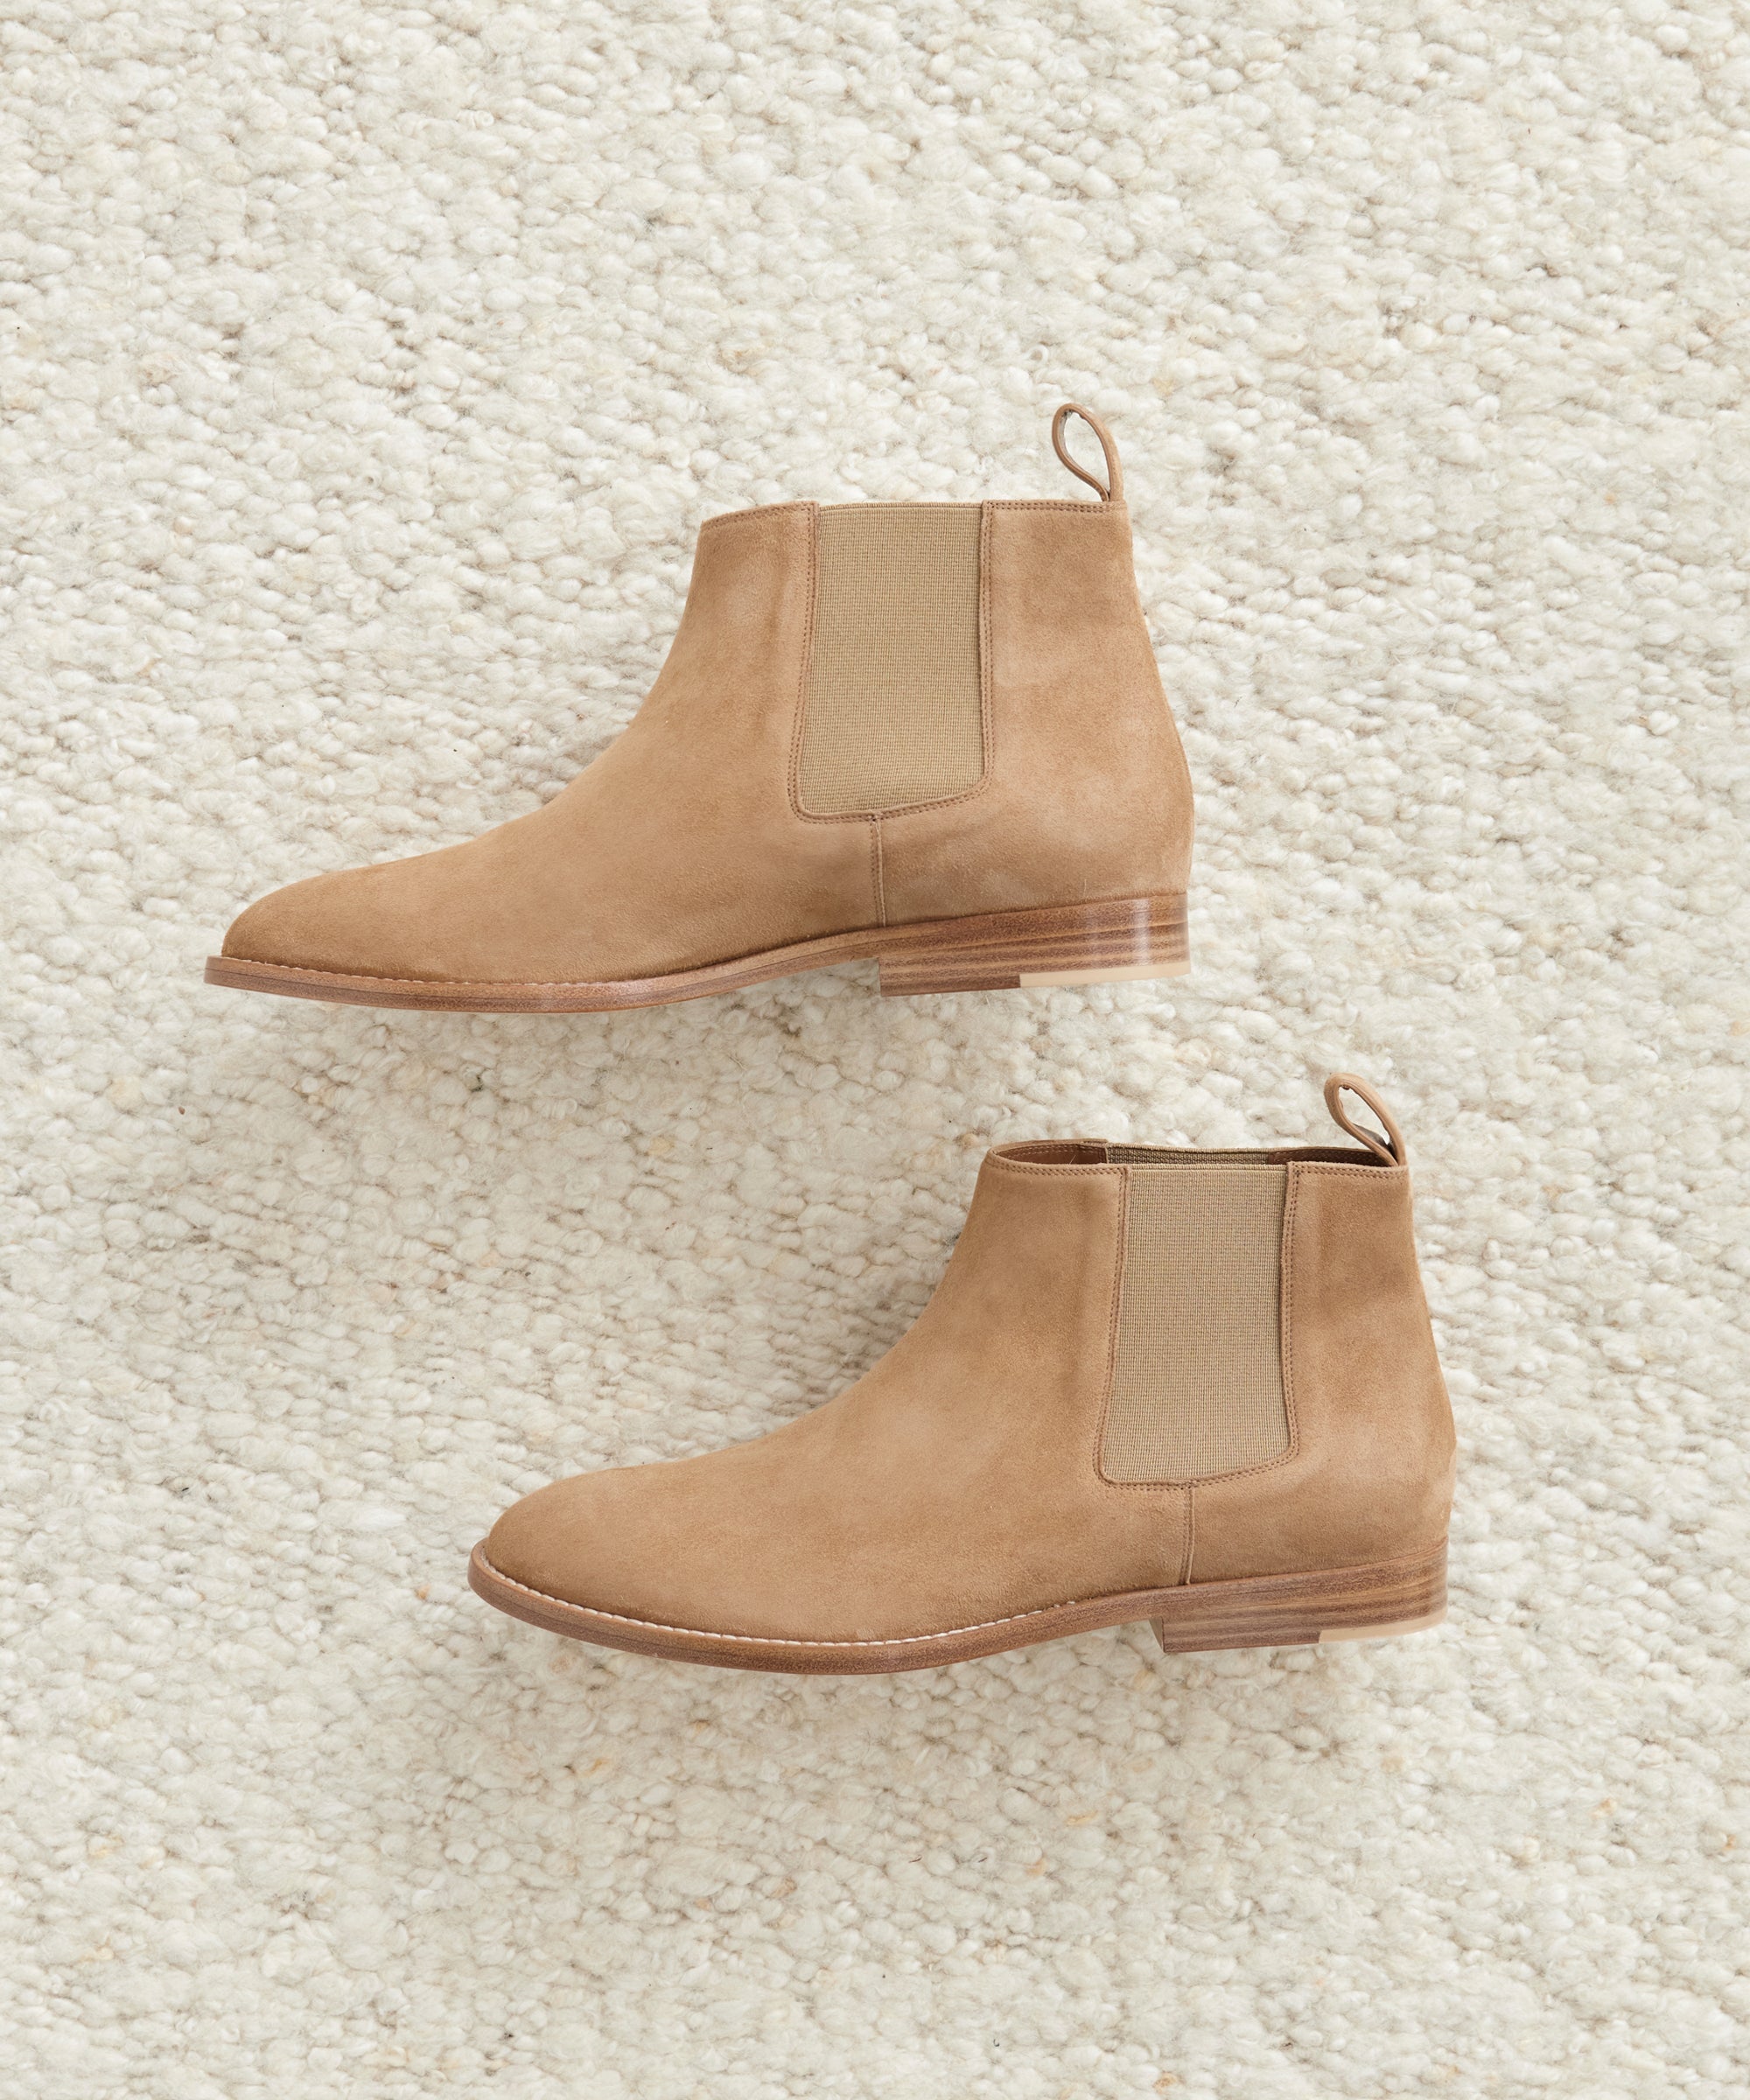 Ankle Boots in Suede